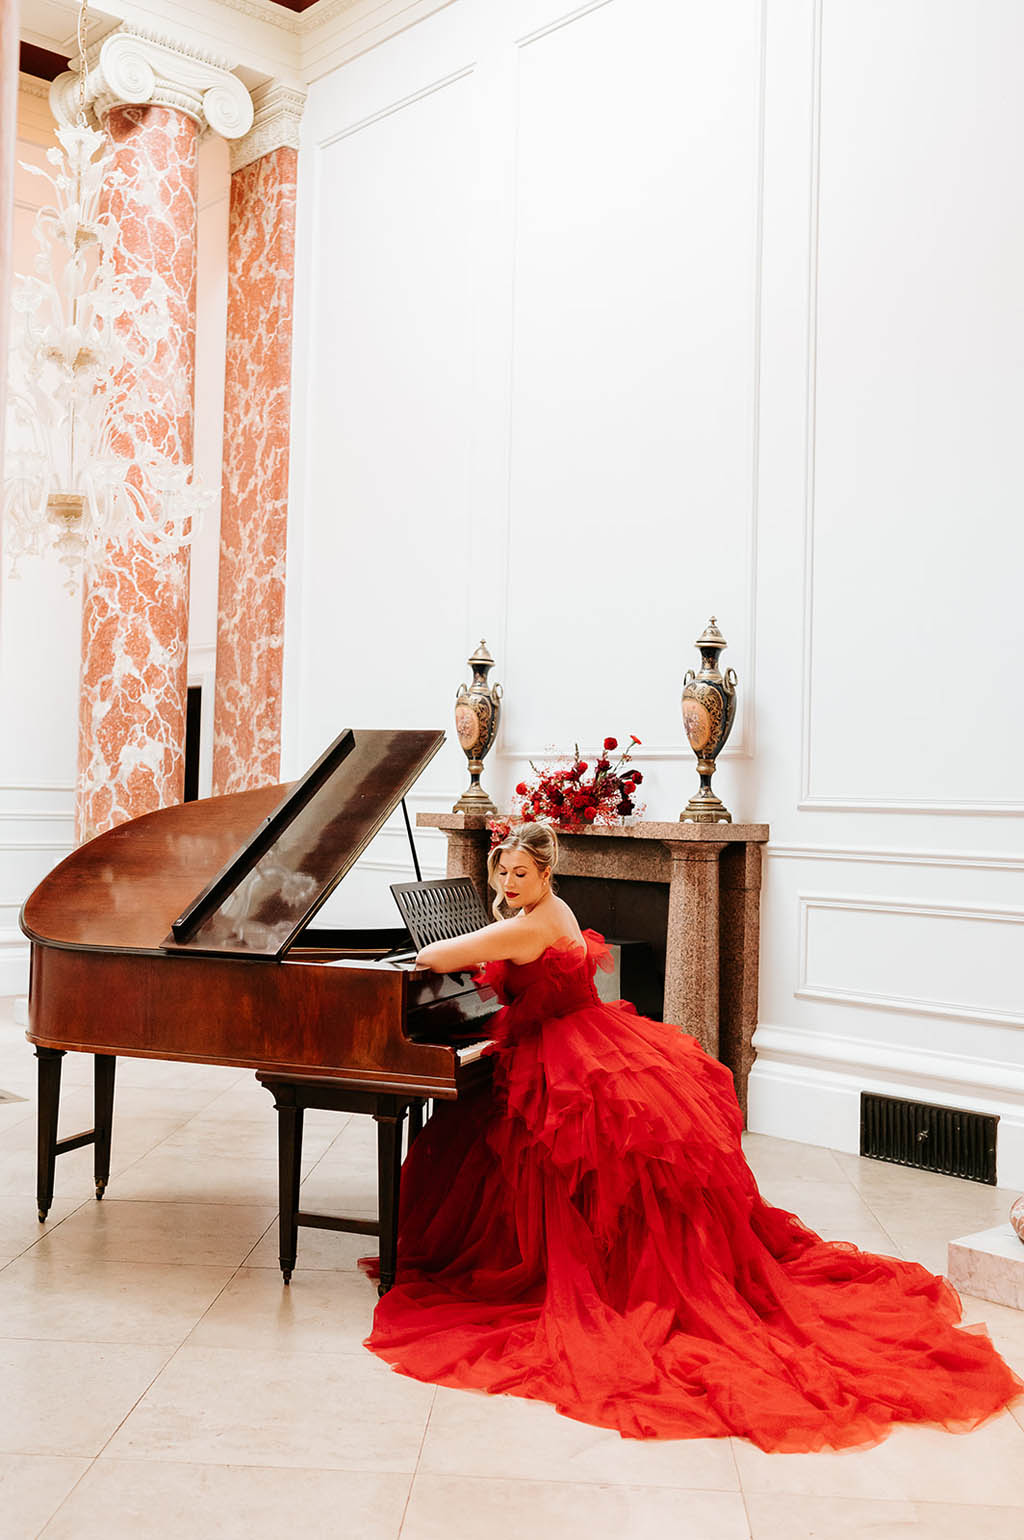 Model in red ballgown at a grand piano photographed at Fillongley Hall